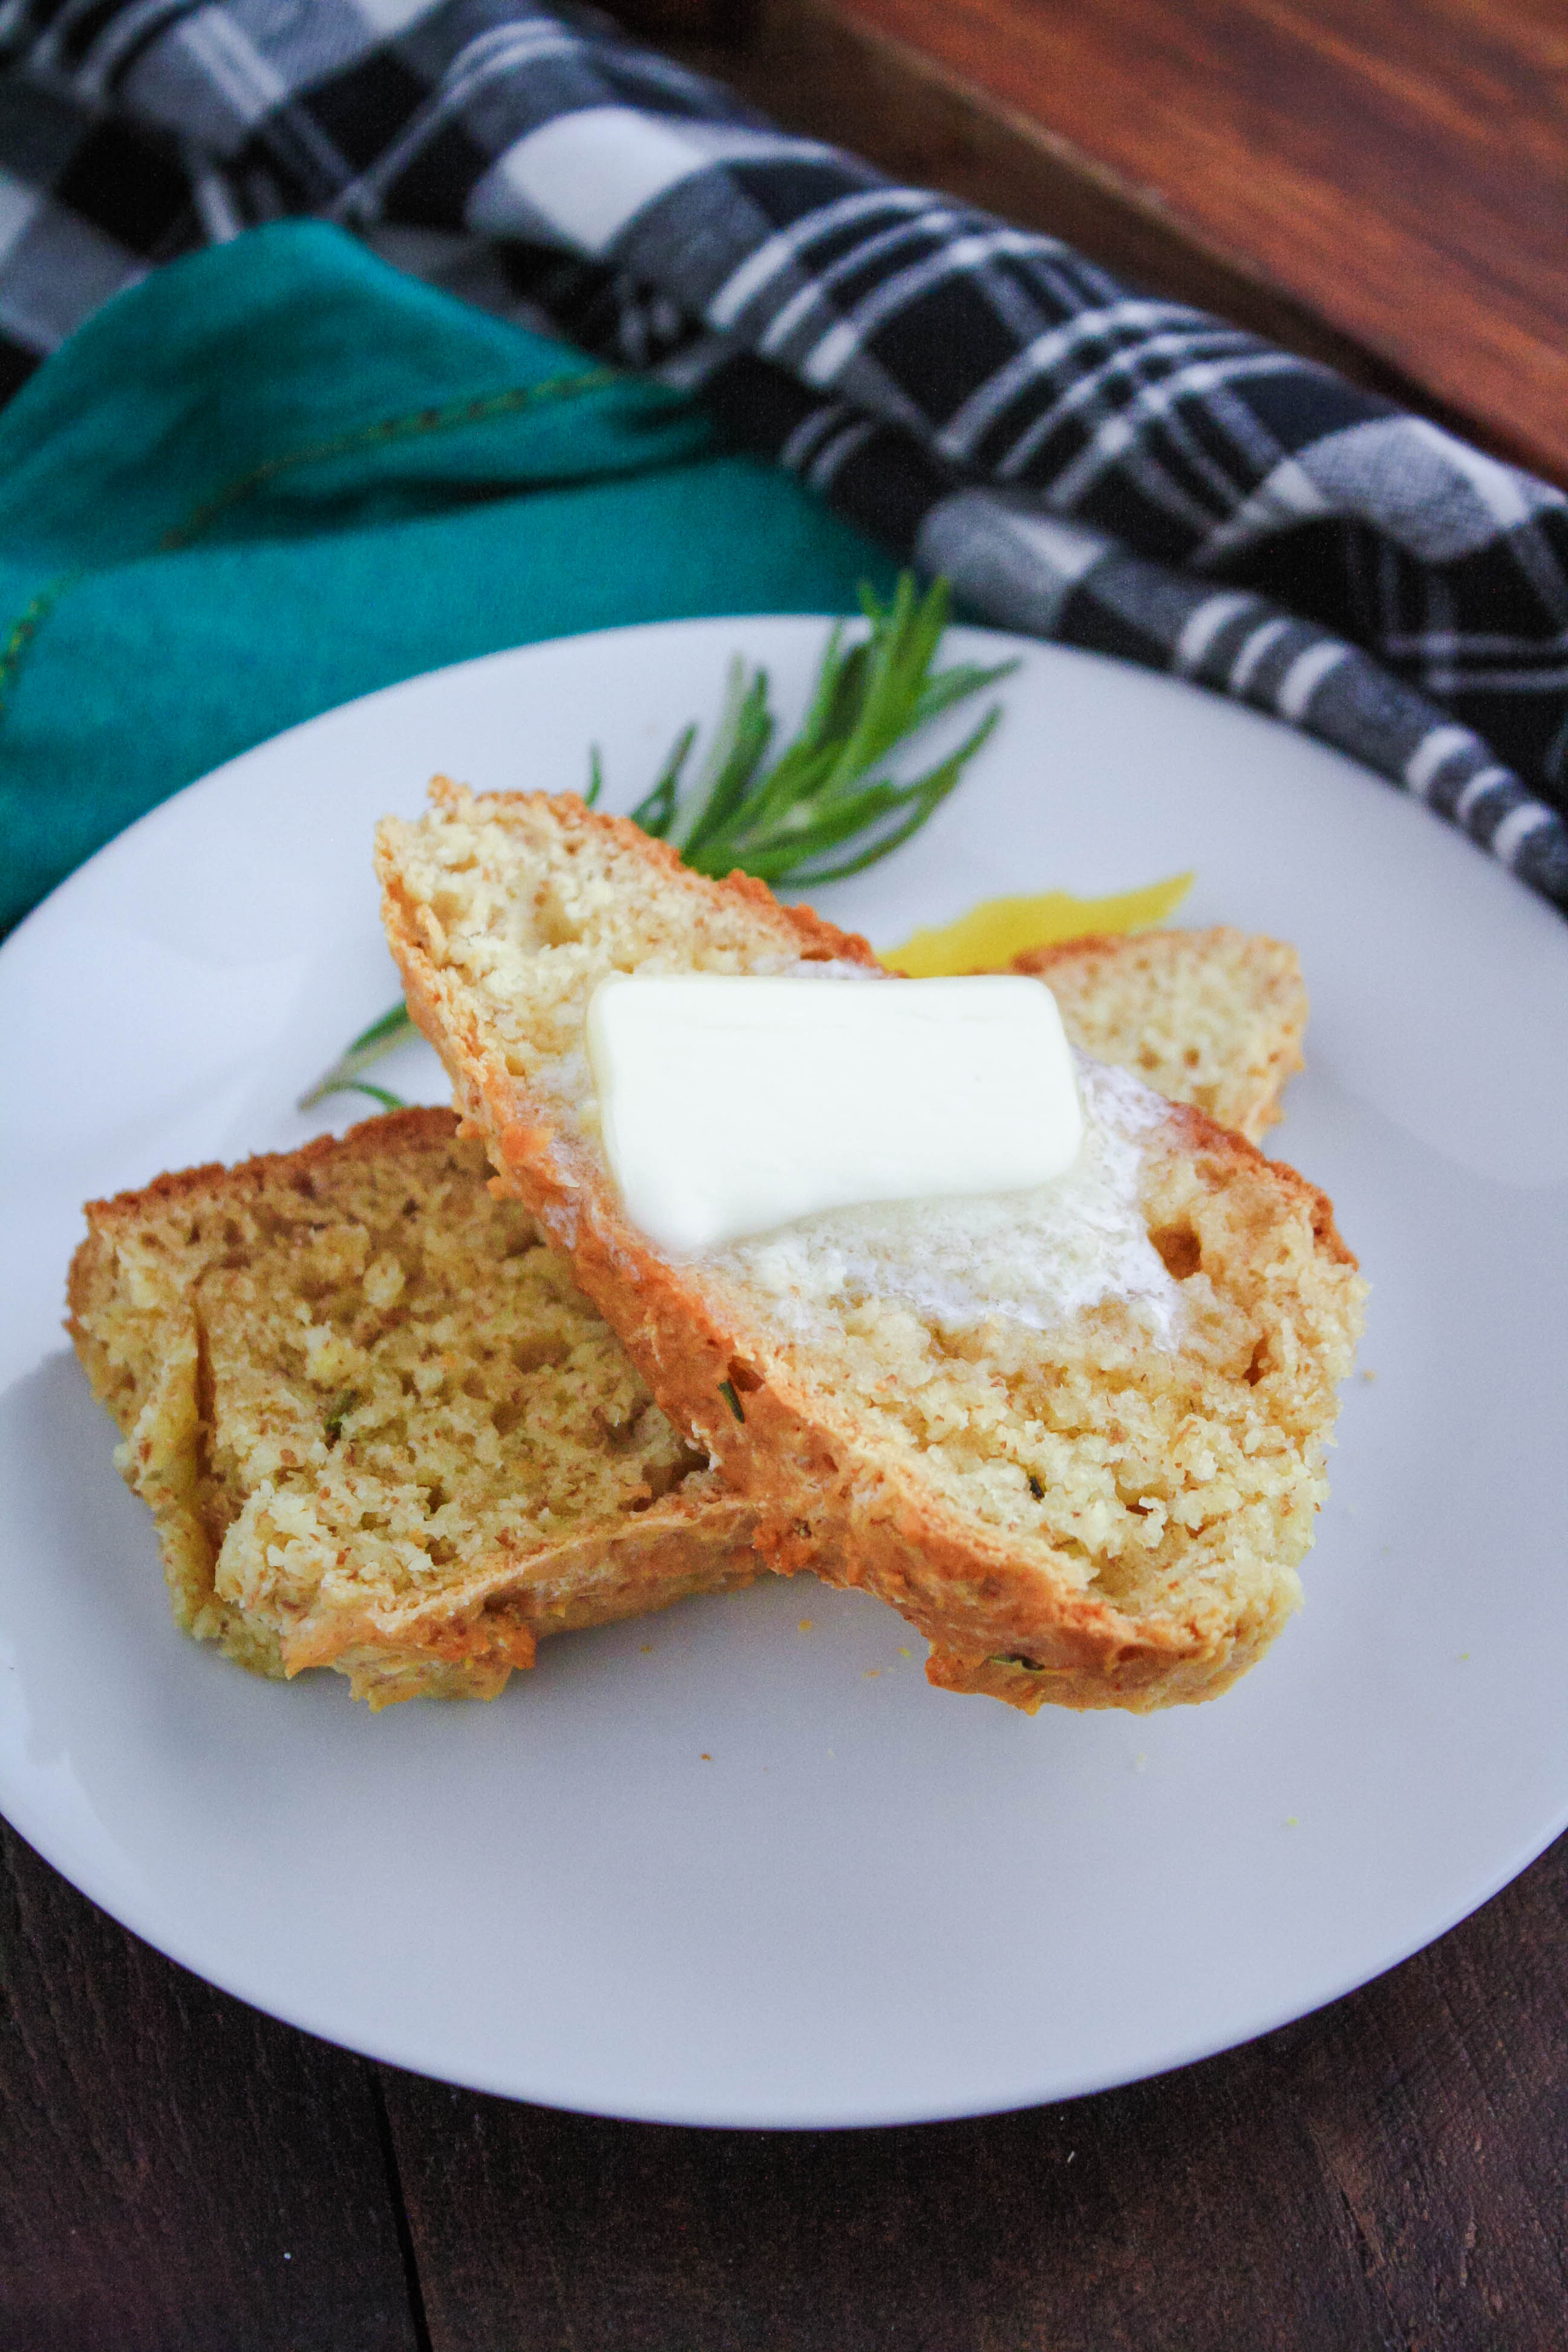 Irish Soda Bread with Rosemary & Lemon slices up so nicely and tastes amazing with a pat of butter. Irish Soda Bread with Rosemary & Lemon is a flavorful quick bread you'll love.